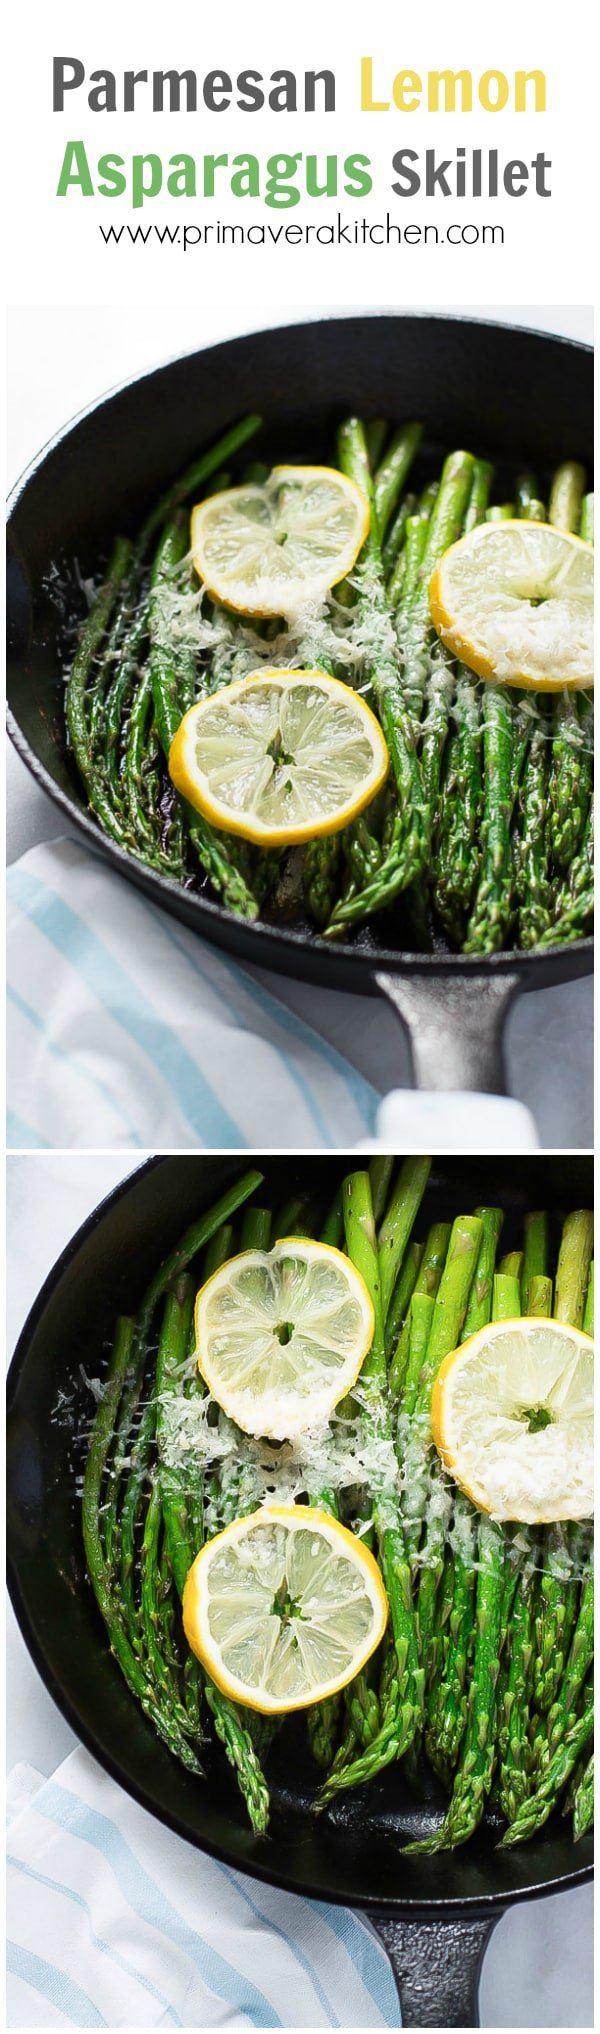 Parmesan Lemon Asparagus Skillet - Enjoy this quick and easy Parmesan Lemon Asparagus Skillet recipe as a healthy side dish during your busy weeknights. This is loaded with Parmesan, garlic, lemon juice, dried oregano and Italian seasoning. 